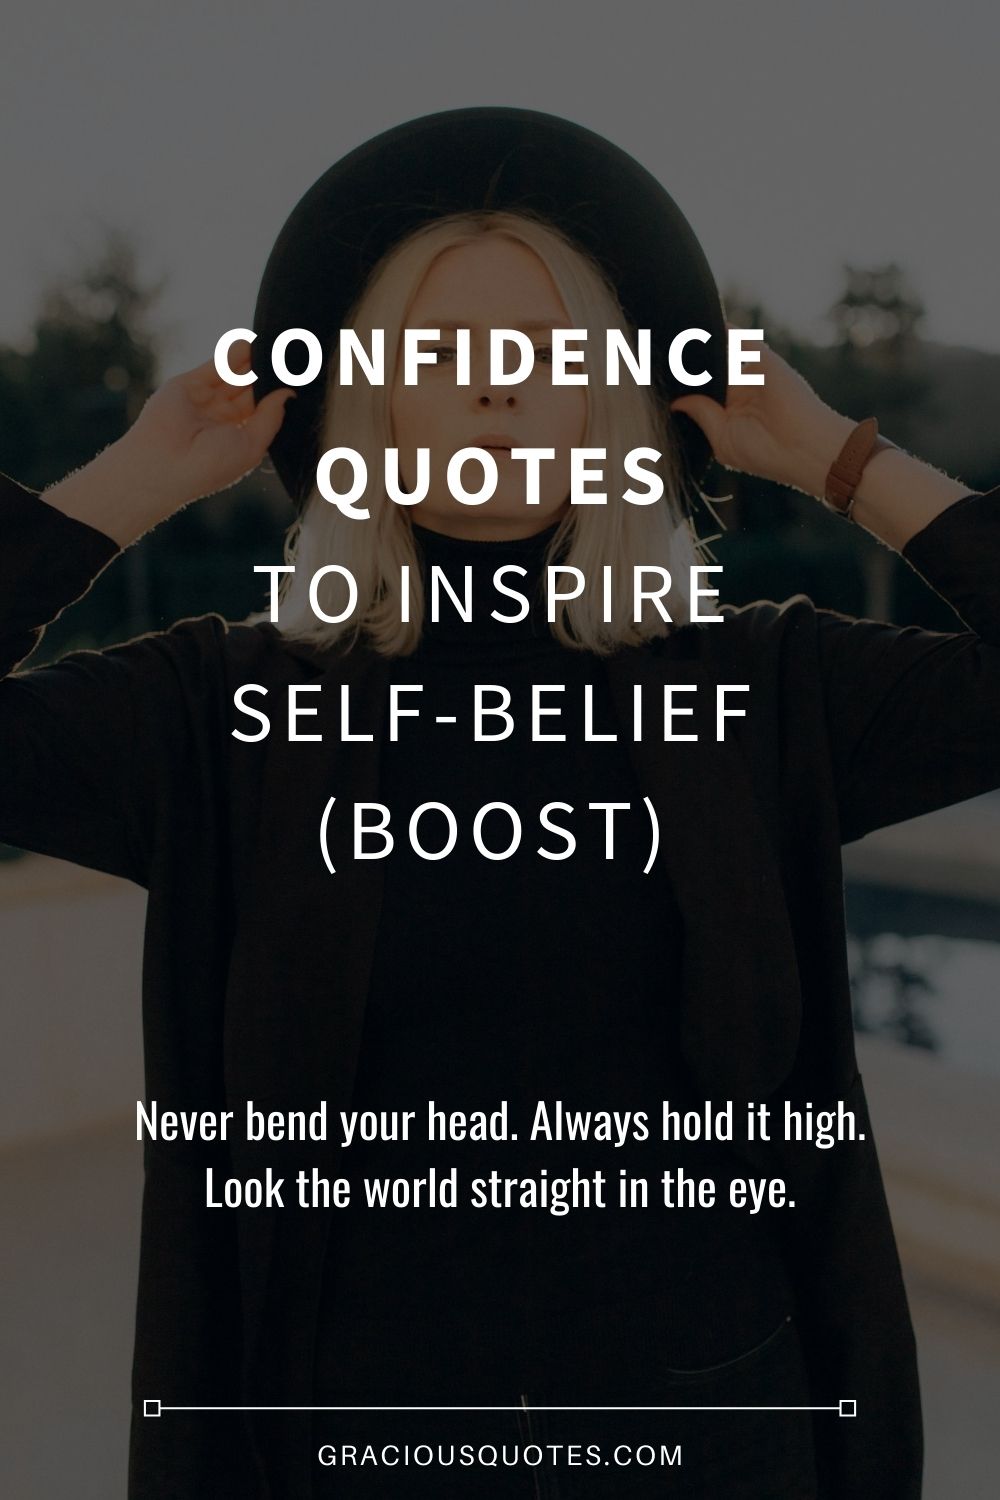 Confidence Quotes to Inspire Self-belief (BOOST) - Gracious Quotes